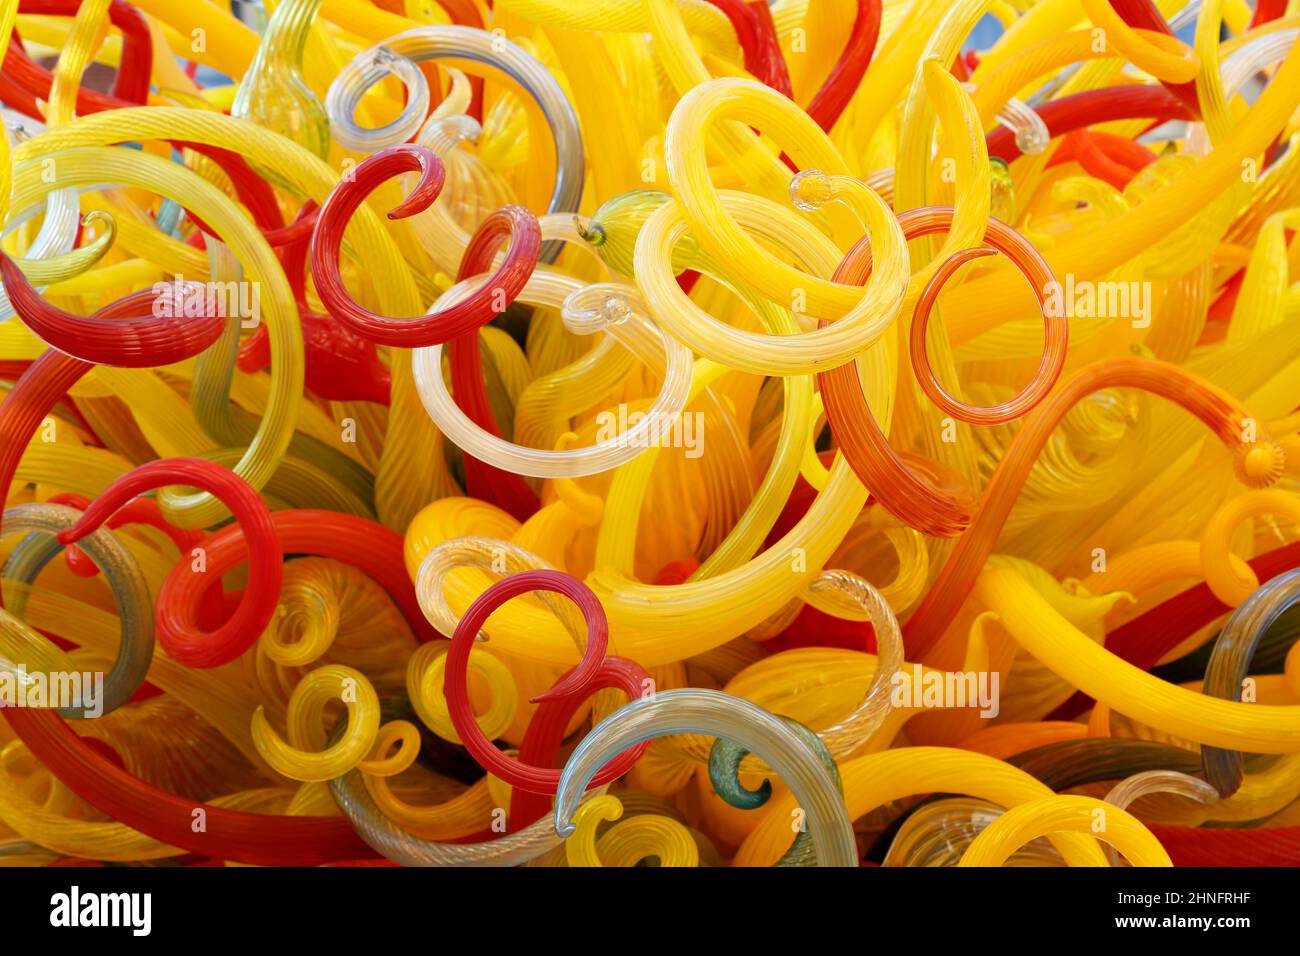 glass sculpture, Montreal, Province of Quebec, Canada Stock Photo